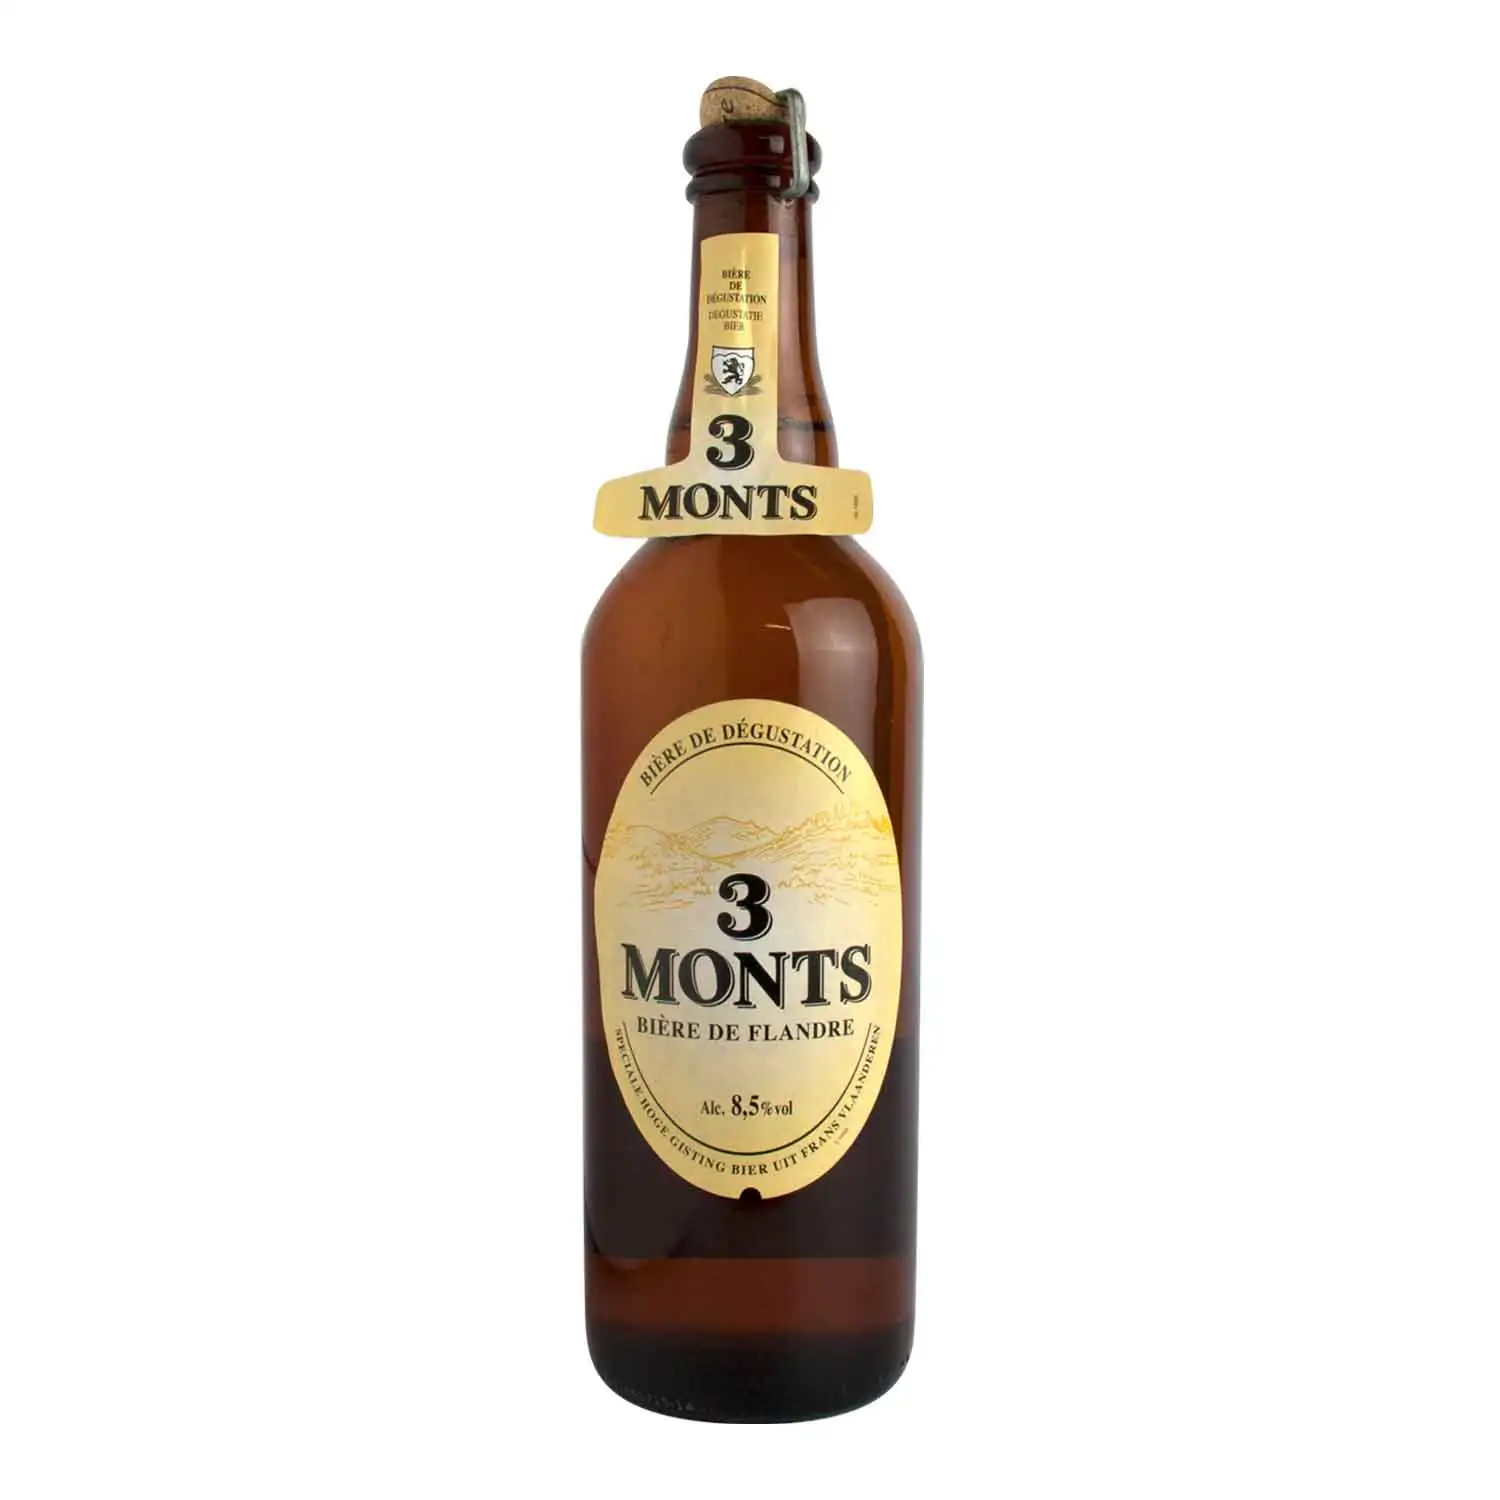 3 Monts 75cl Alc 8,5% - Buy at Real Tobacco